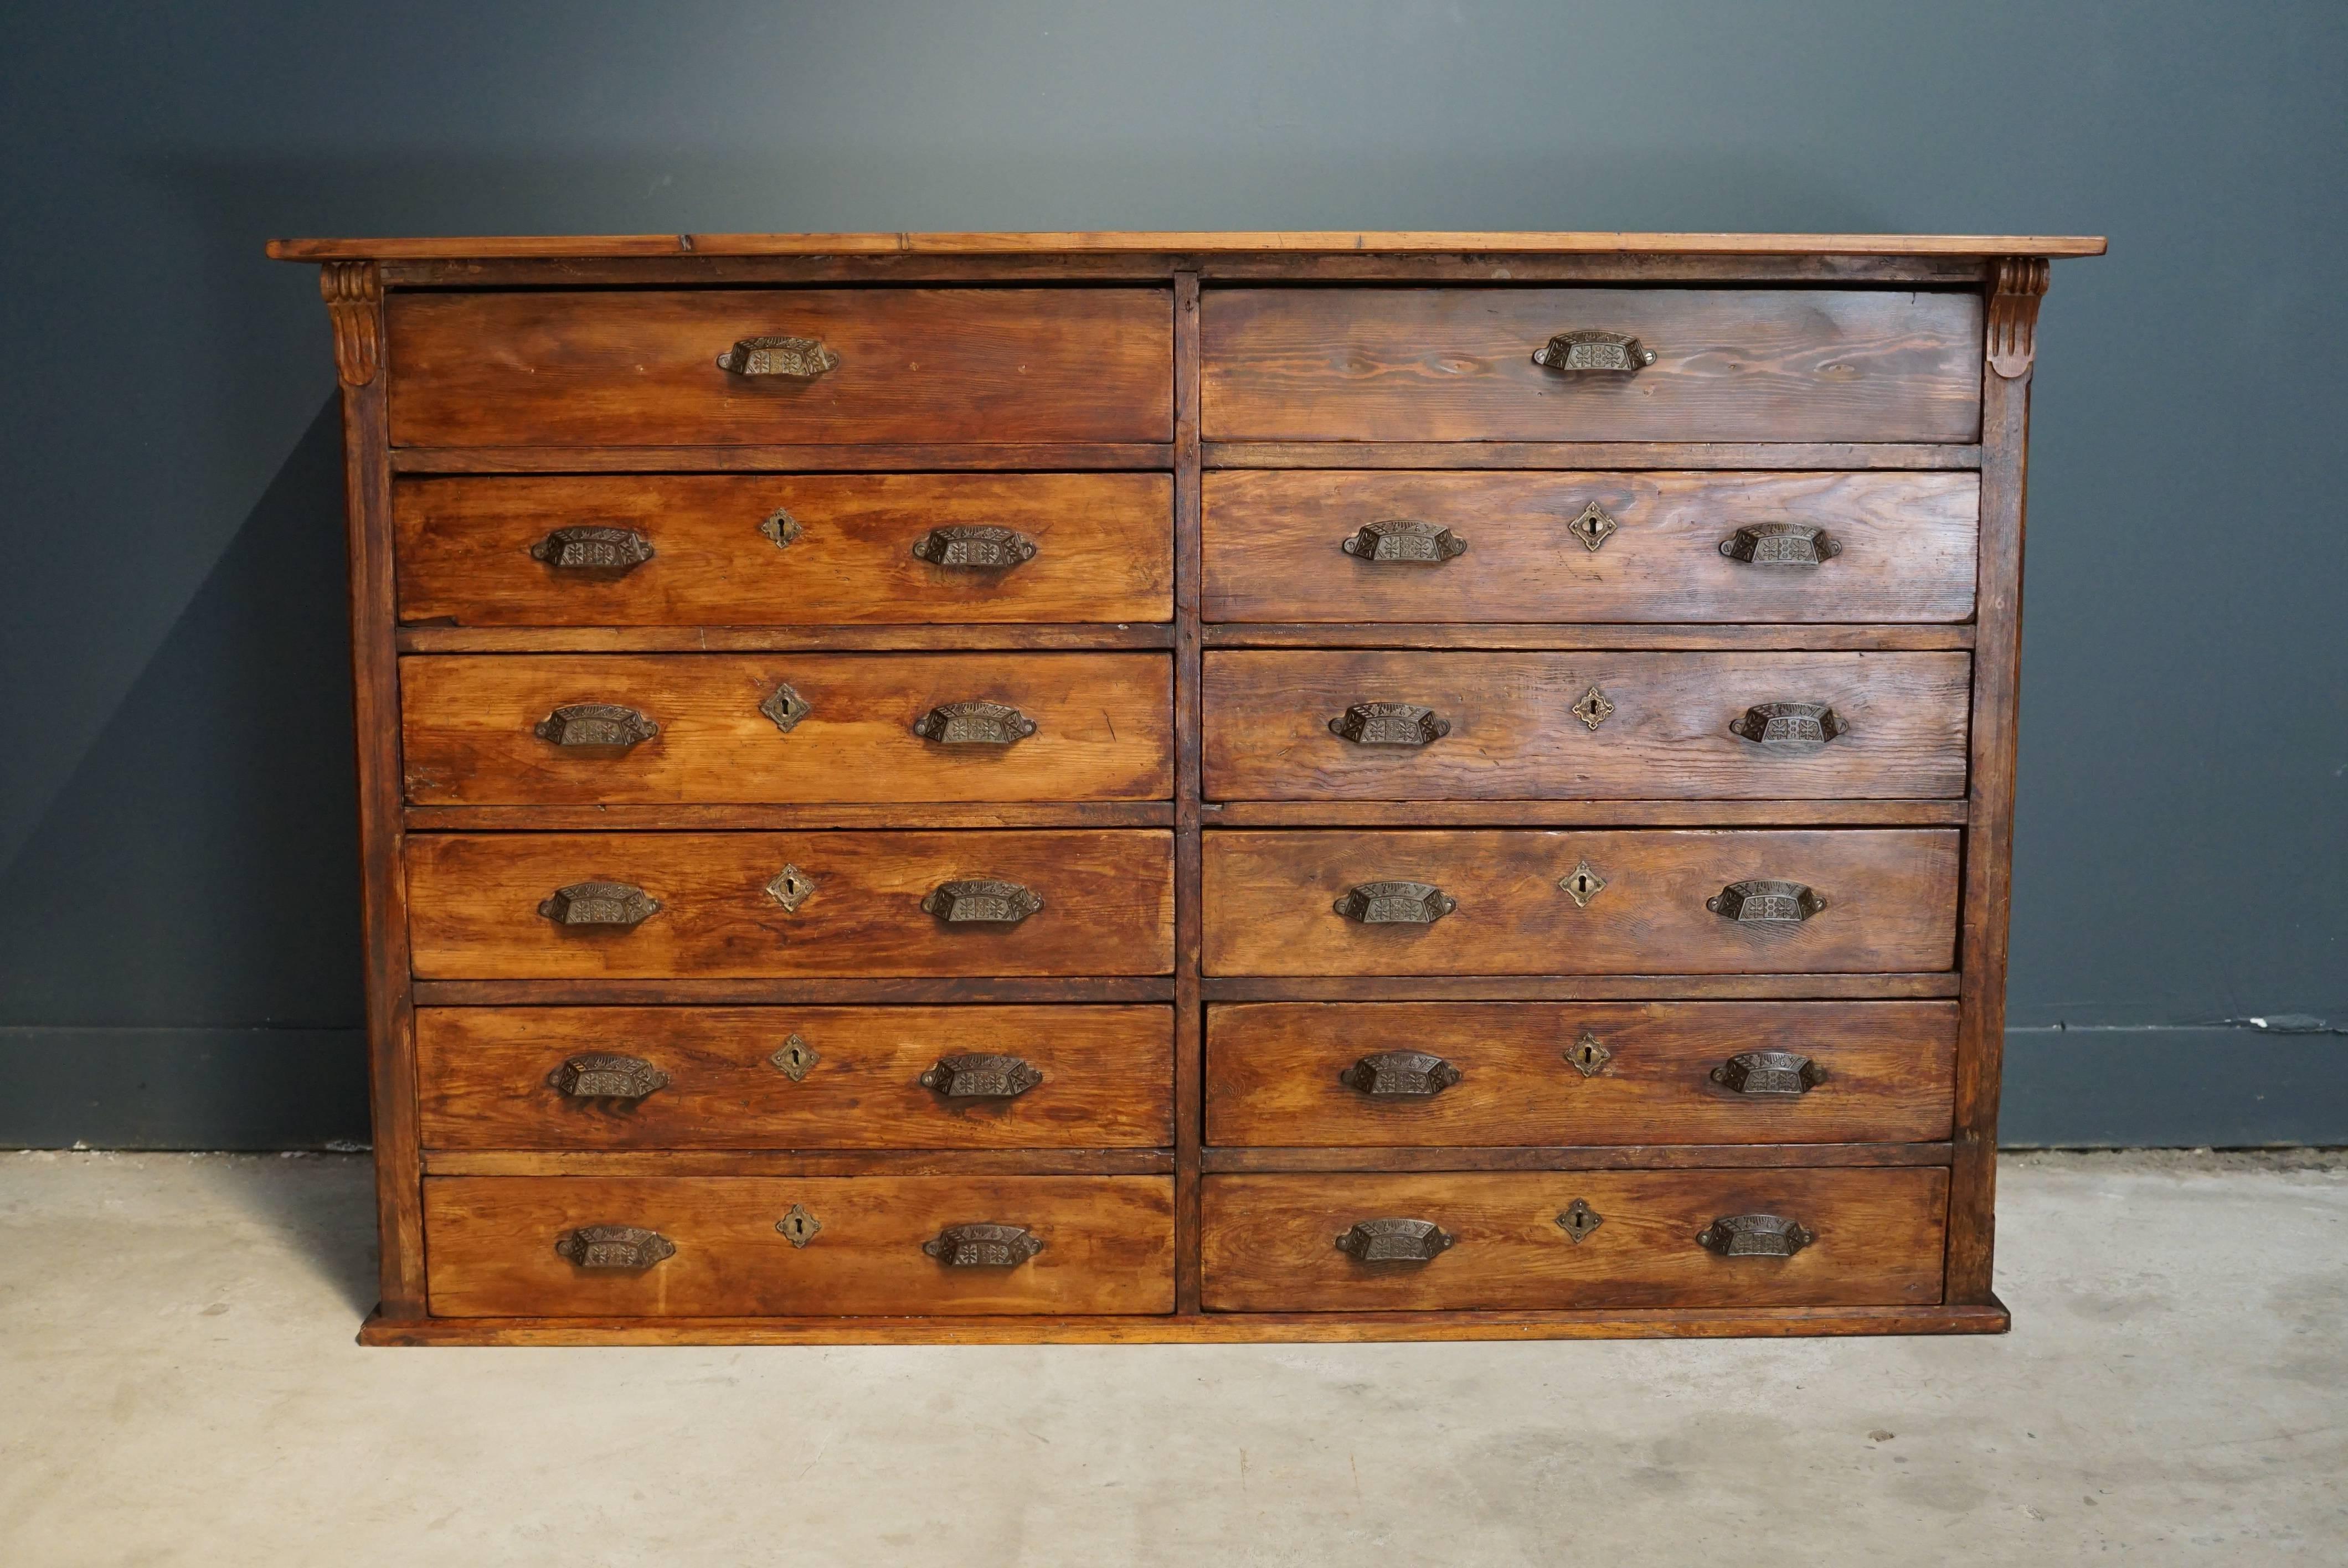 This apothecary cabinet of drawers was designed, circa 1920s in France. The piece is made from pine and features eight large drawers with cast iron handles.